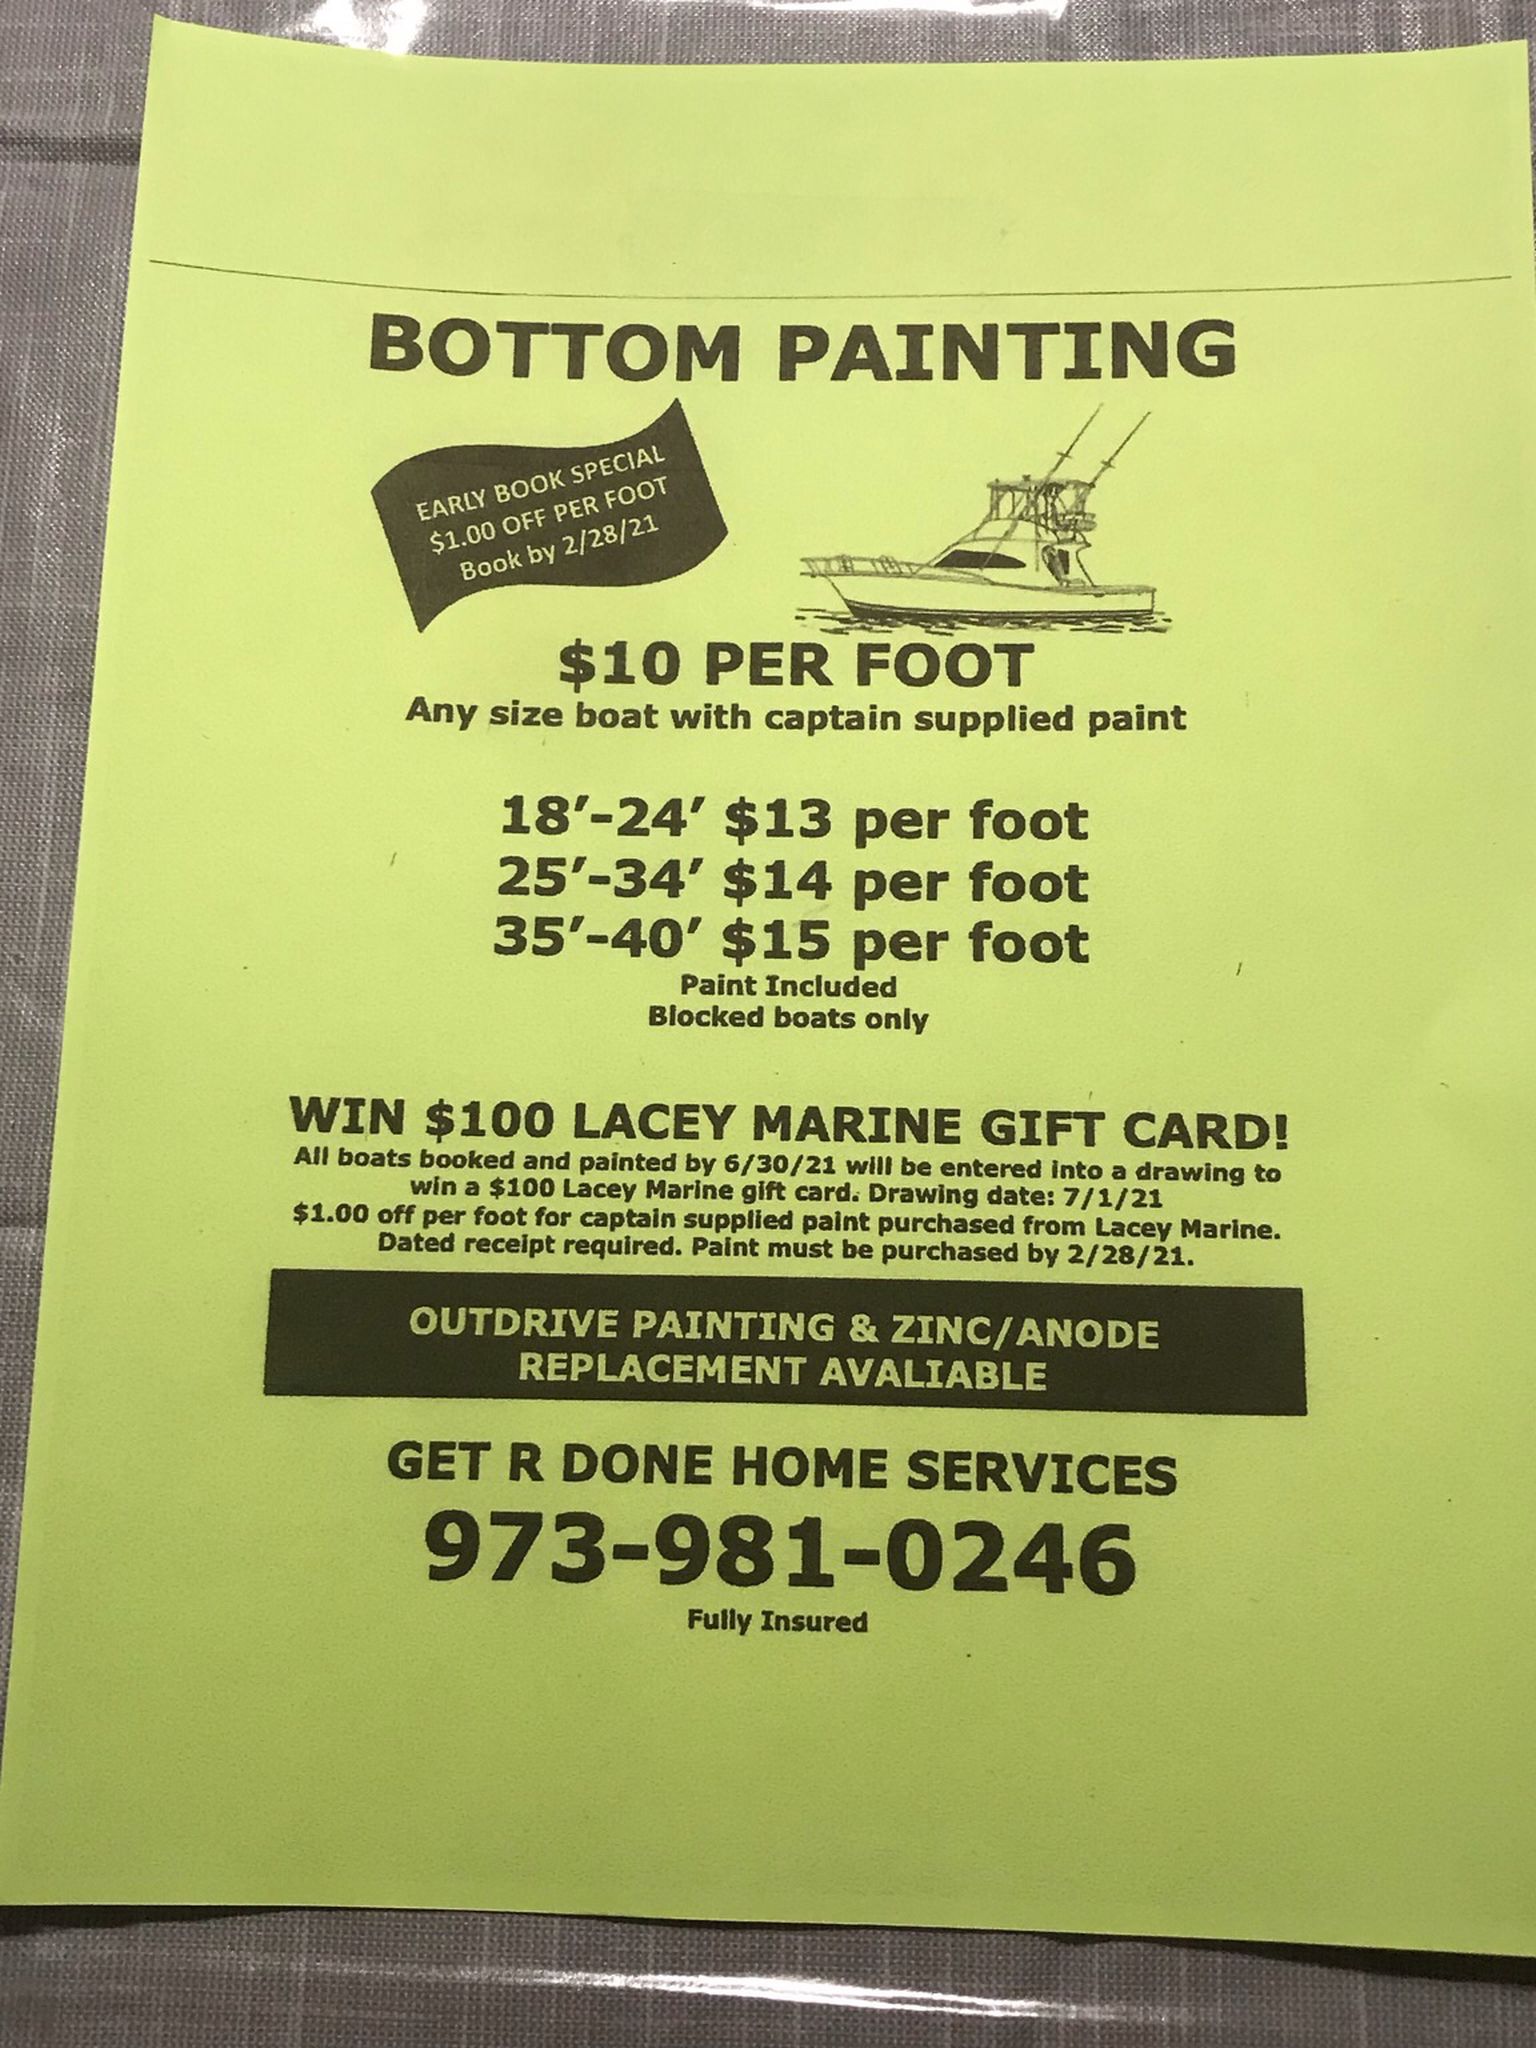 Bottom Painting Save By Booking Date By 2/28/21